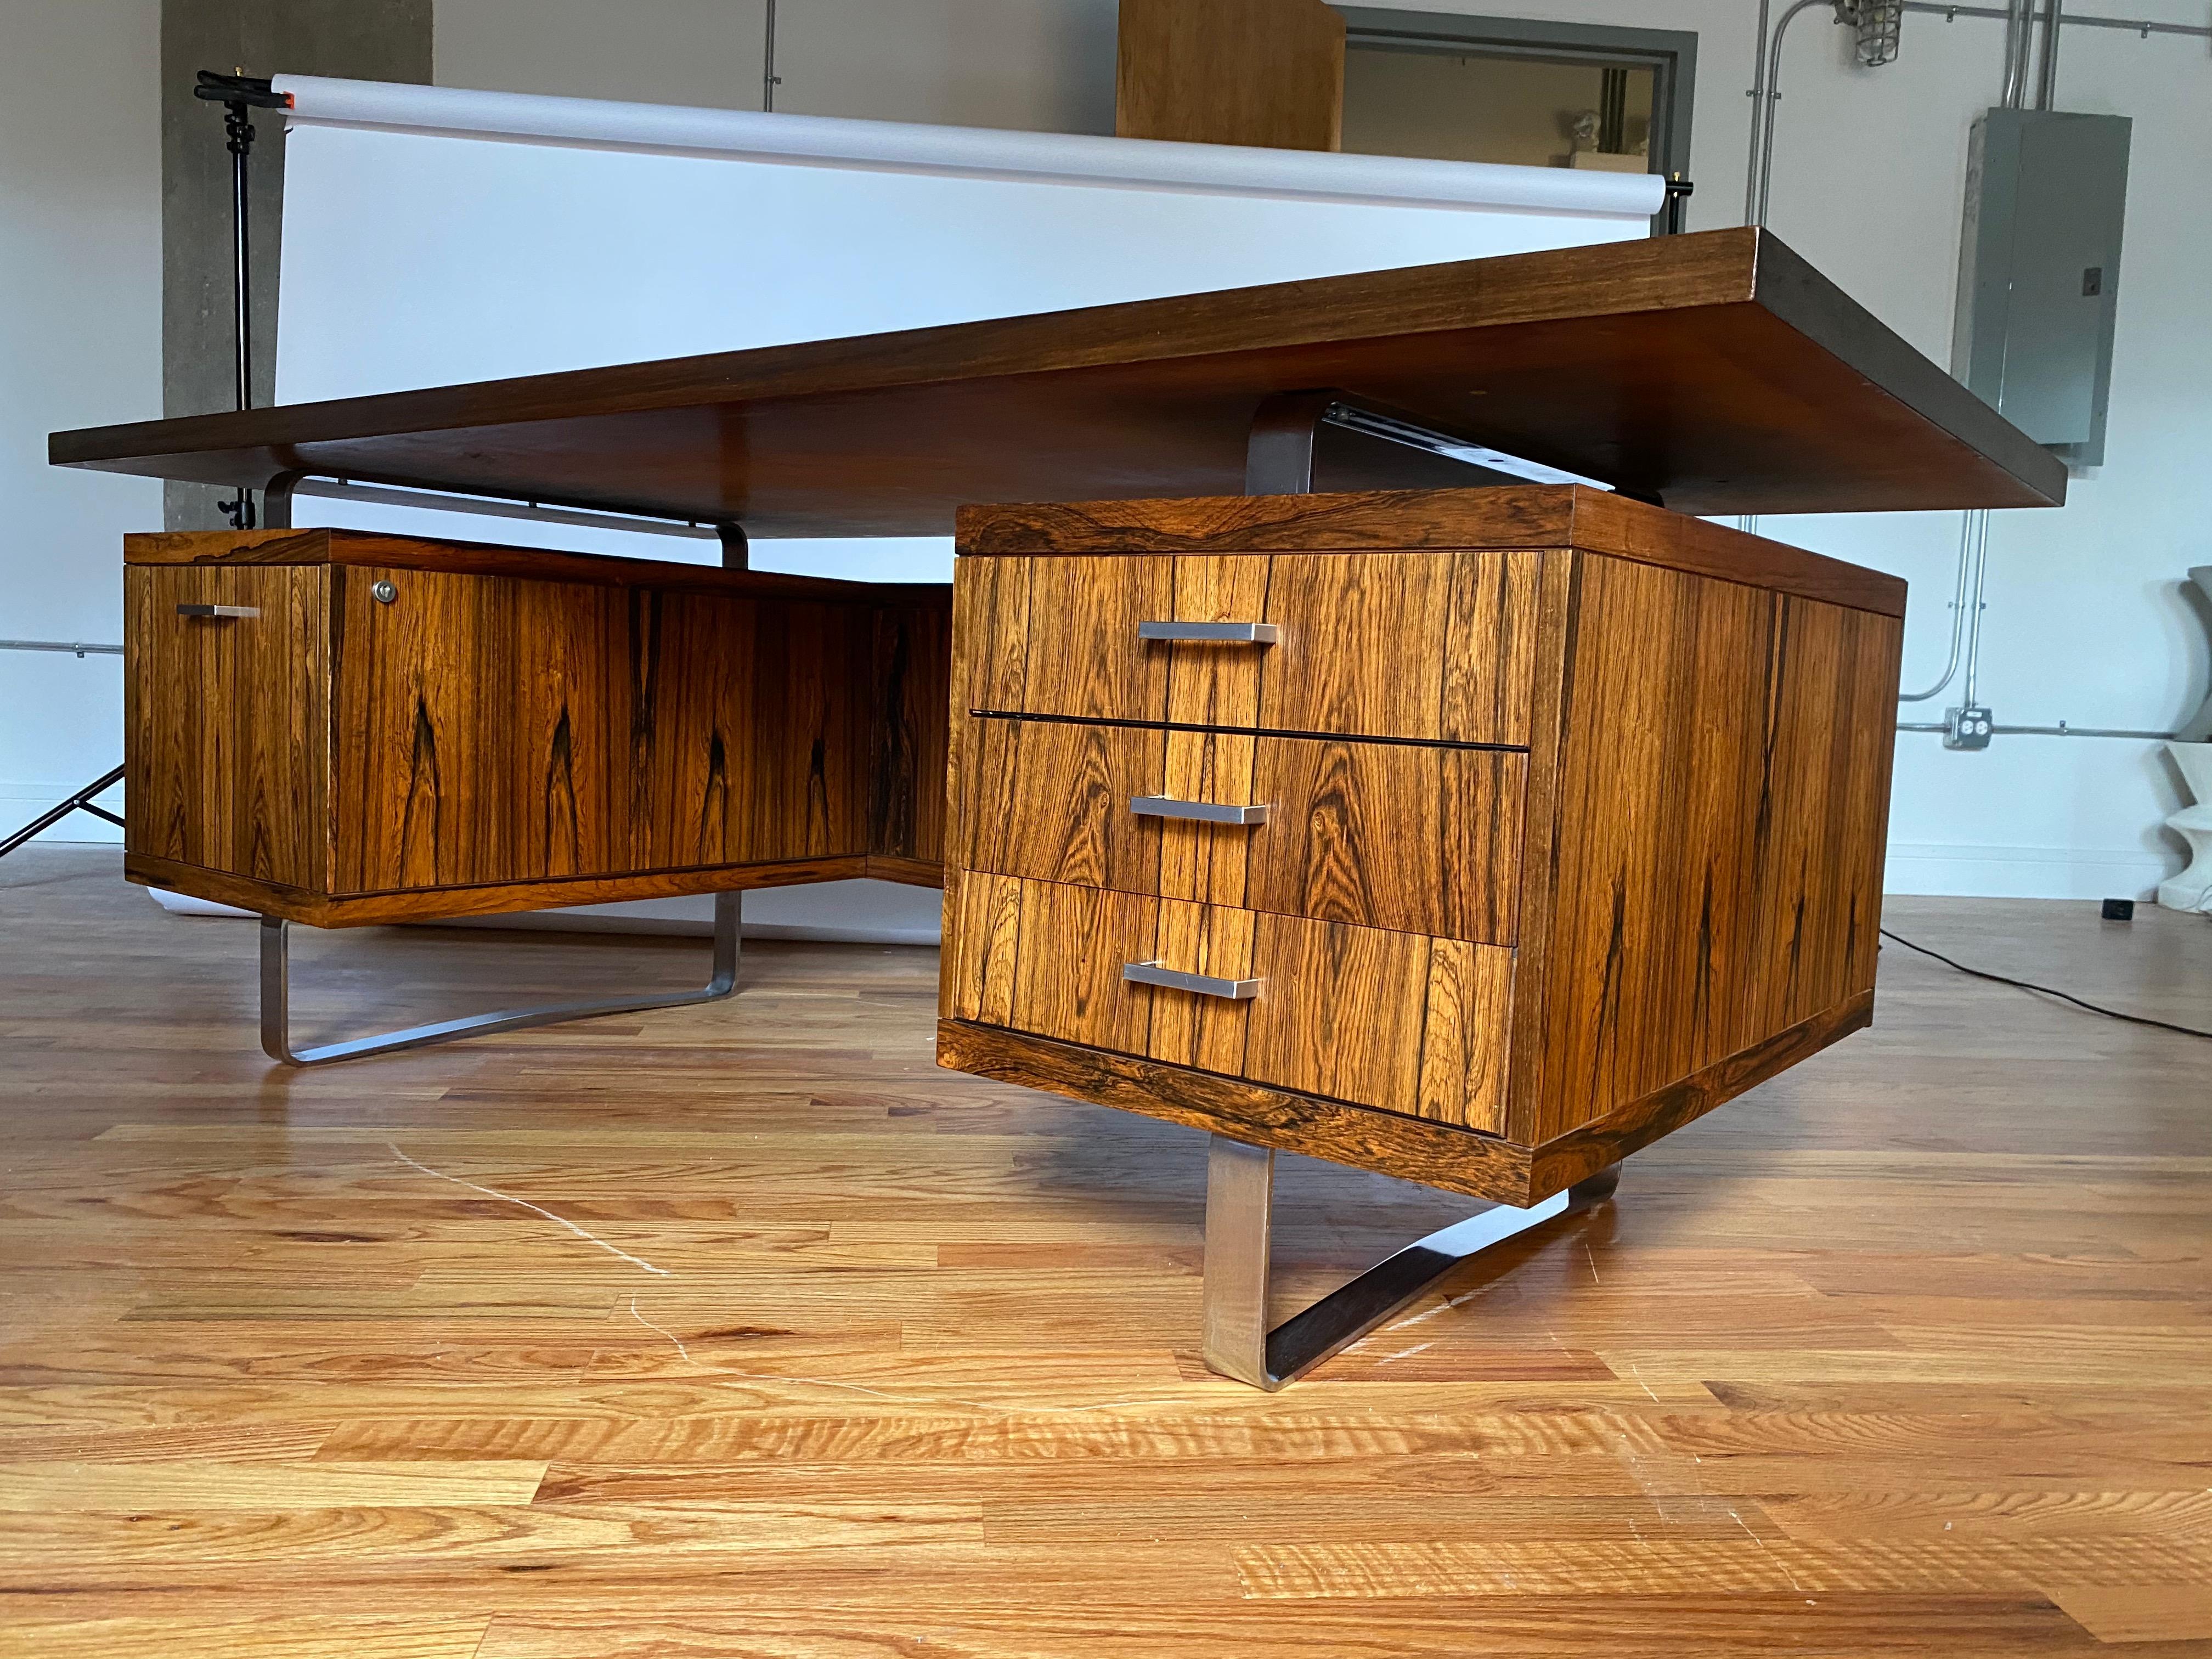 1960s Danish modern rosewood executive desk by Jorgen Pedersen, Denmark. Gorgeous exotic wood grain in magnificent condition for its age with a floating desk top connected by brushed stainless metal hardware and sled legs. Ample storage includes